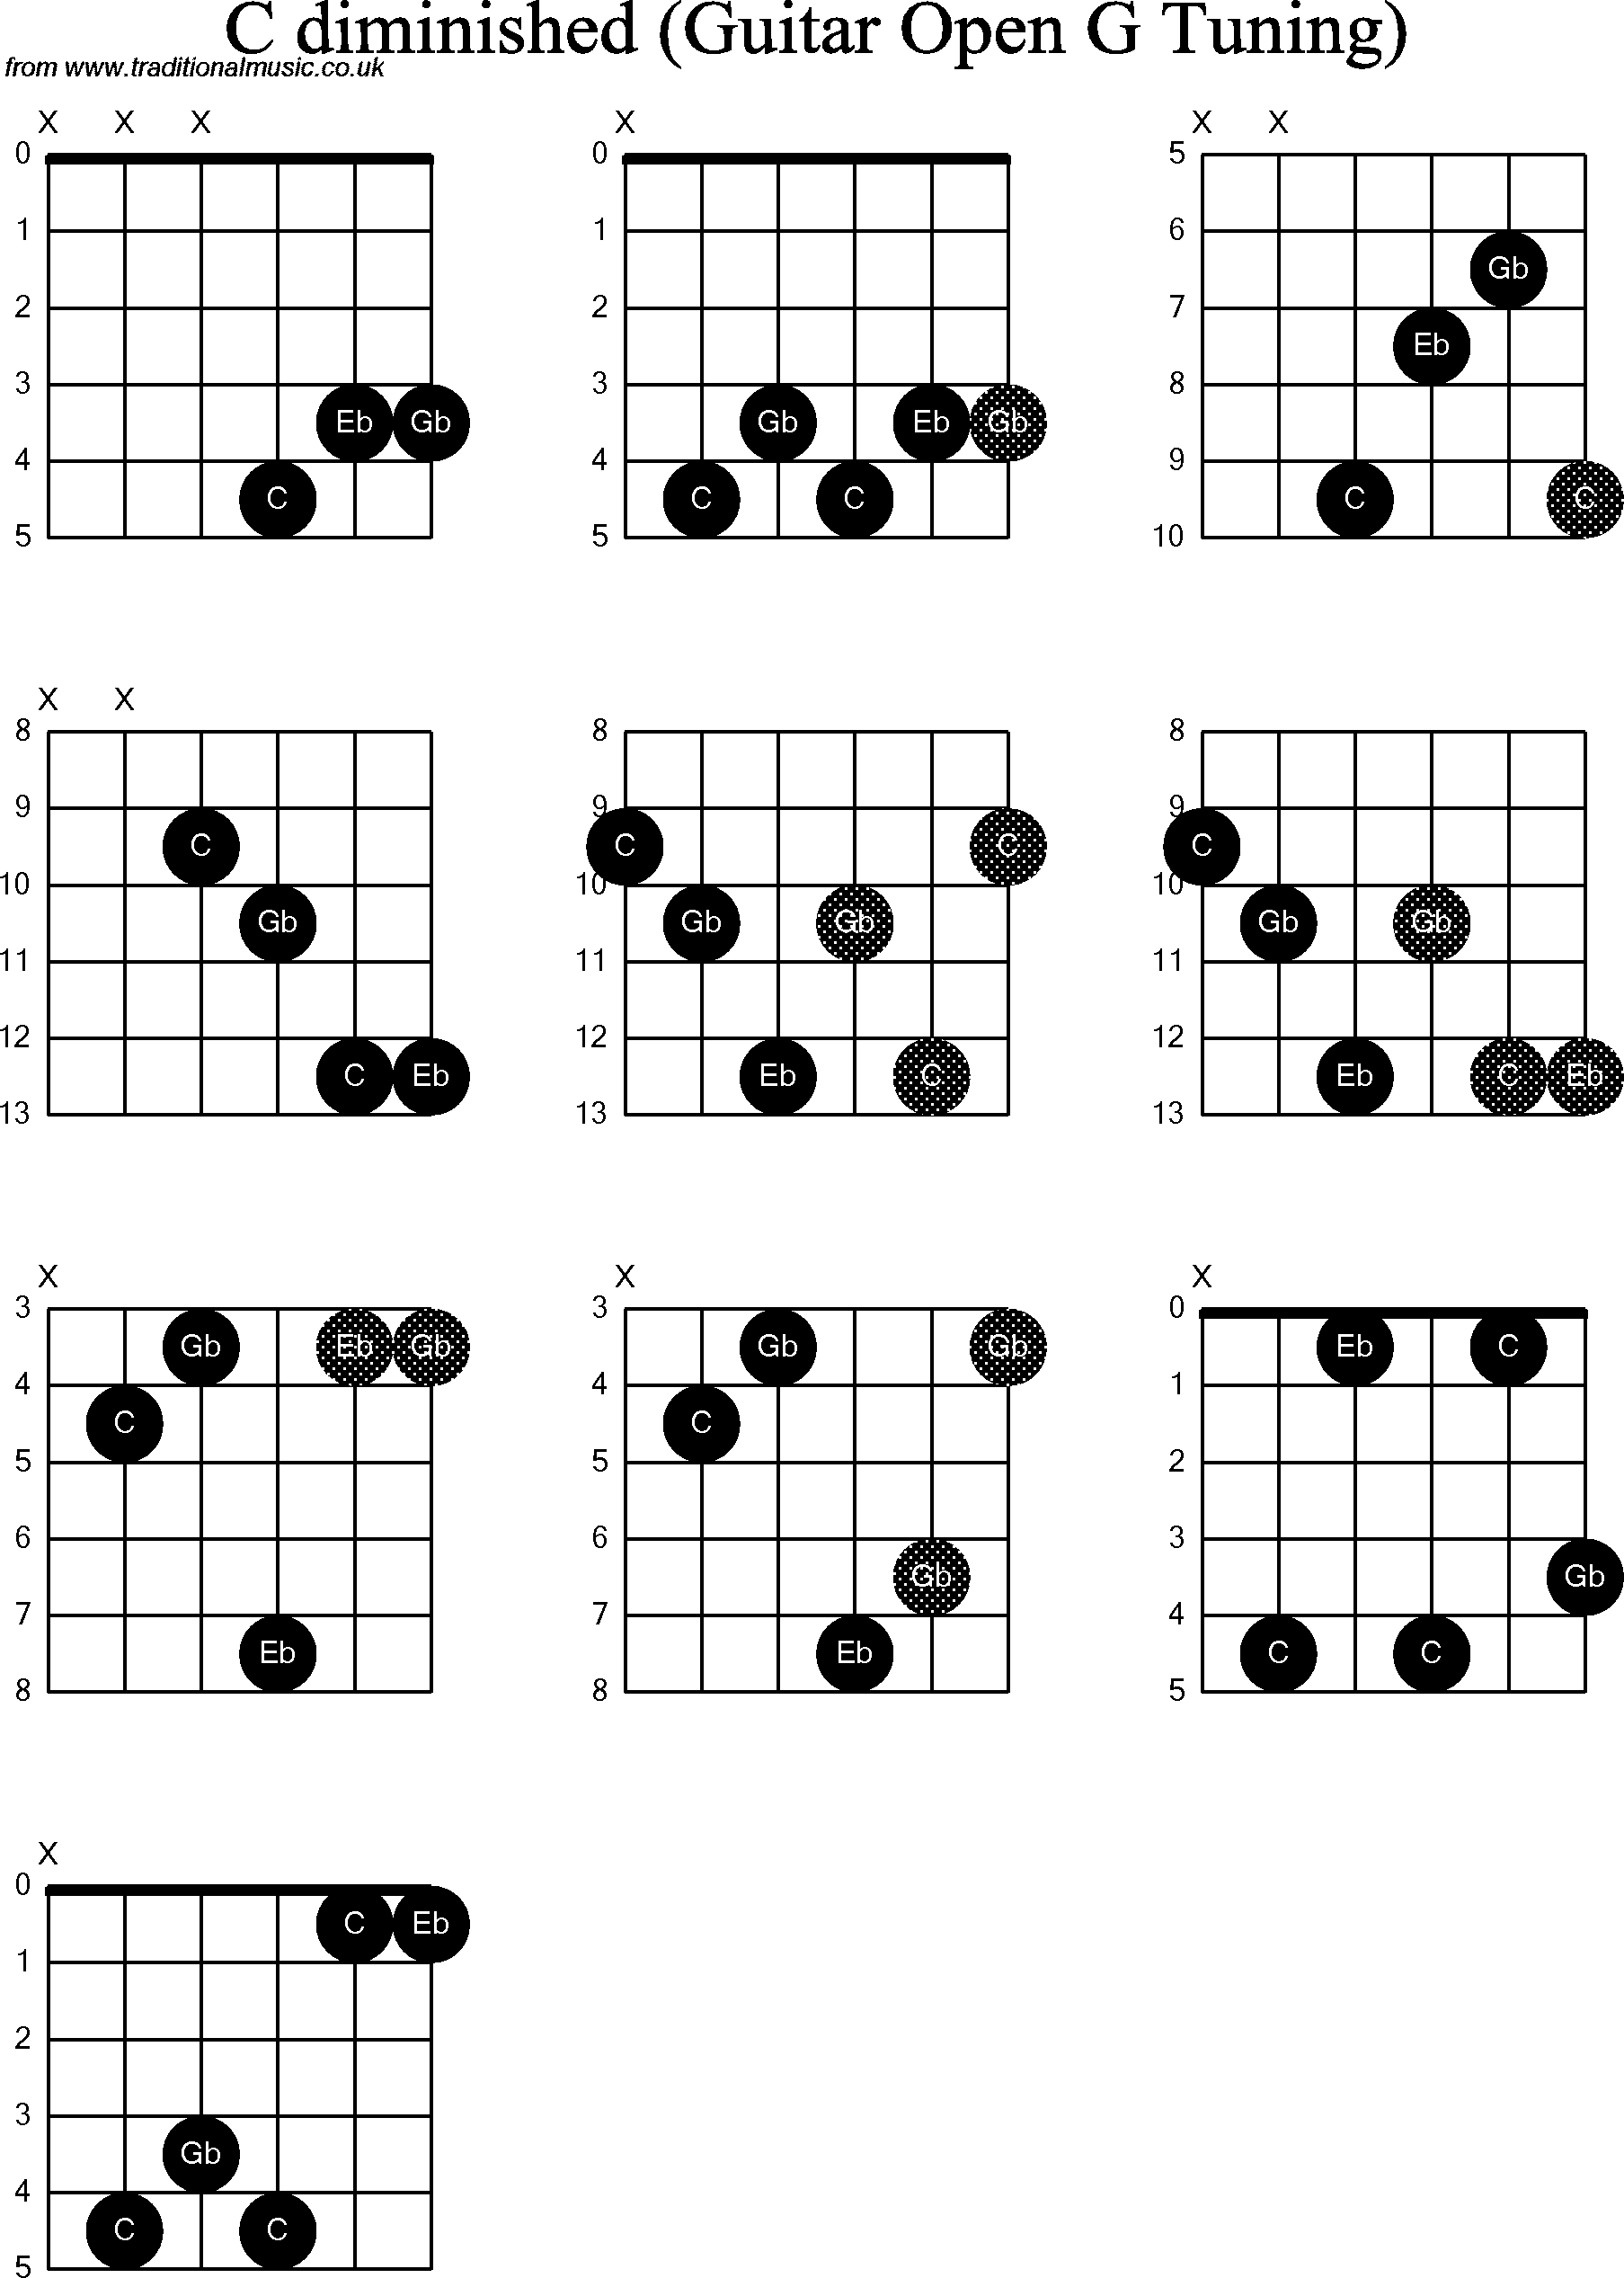 Chord diagrams for Dobro C Diminished